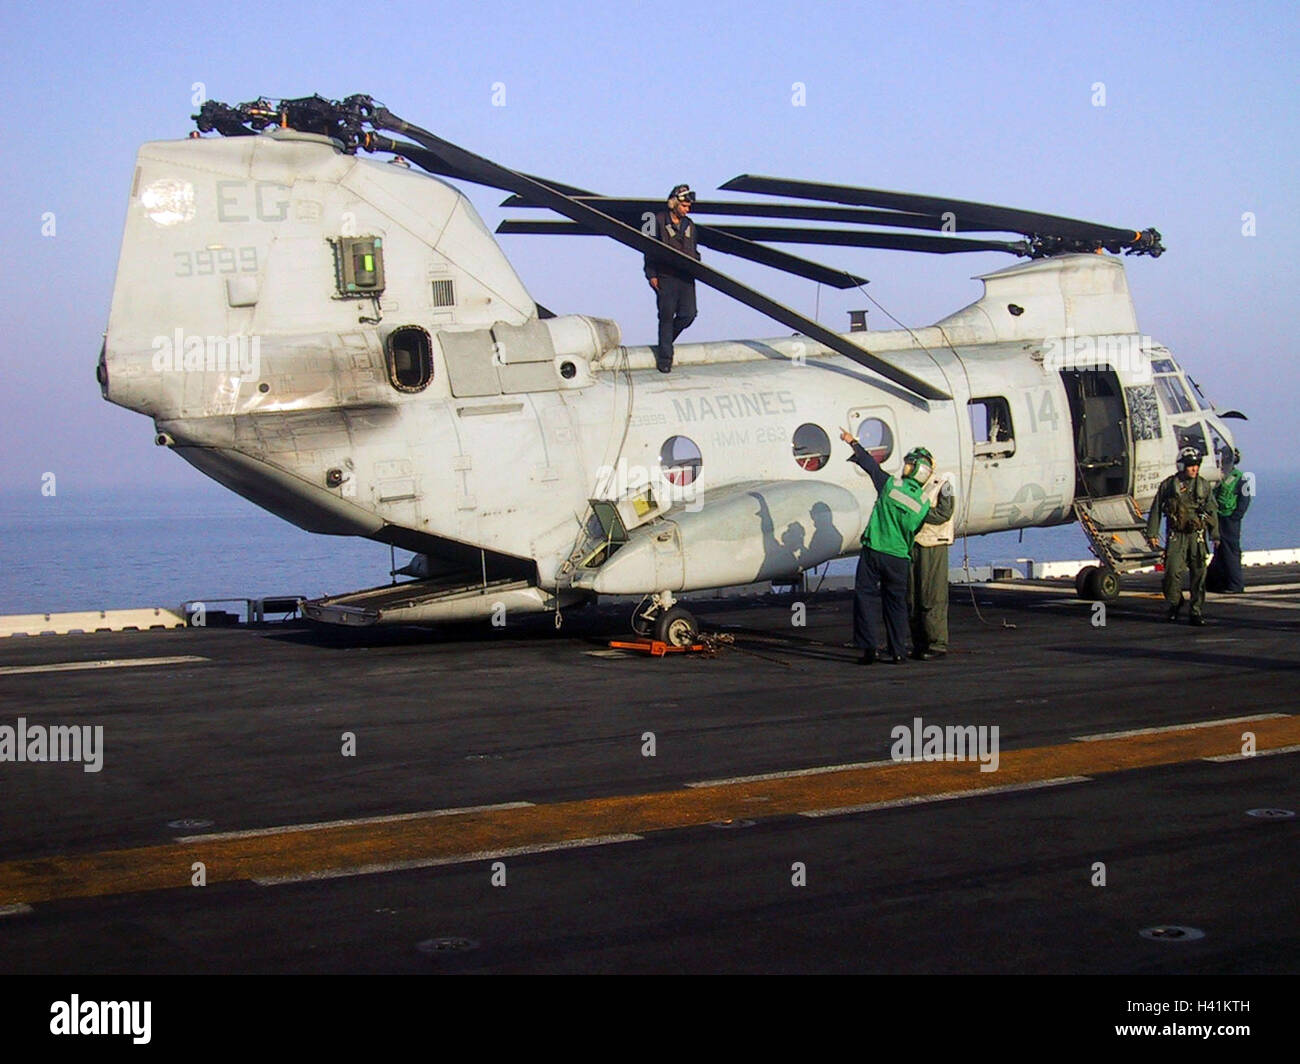 27th January 2003 Operation Enduring Freedom: a U.S. Marines CH-46E Sea Knight helicopter on the USS Nassau in the Persian Gulf. Stock Photo